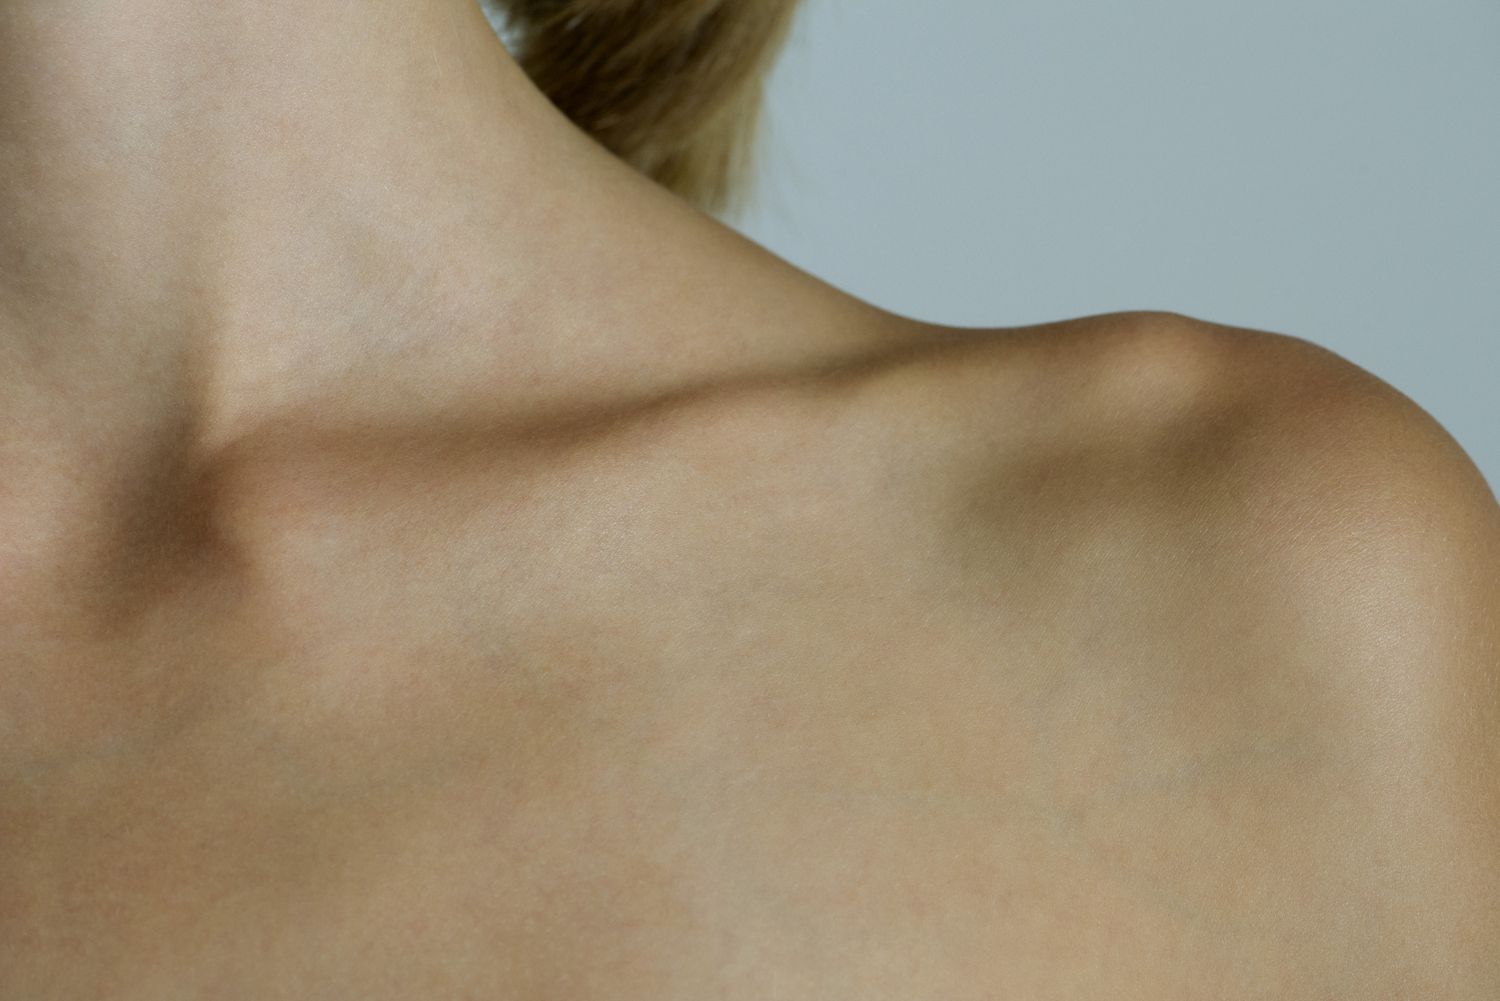 17-astounding-facts-about-clavicle-collarbone